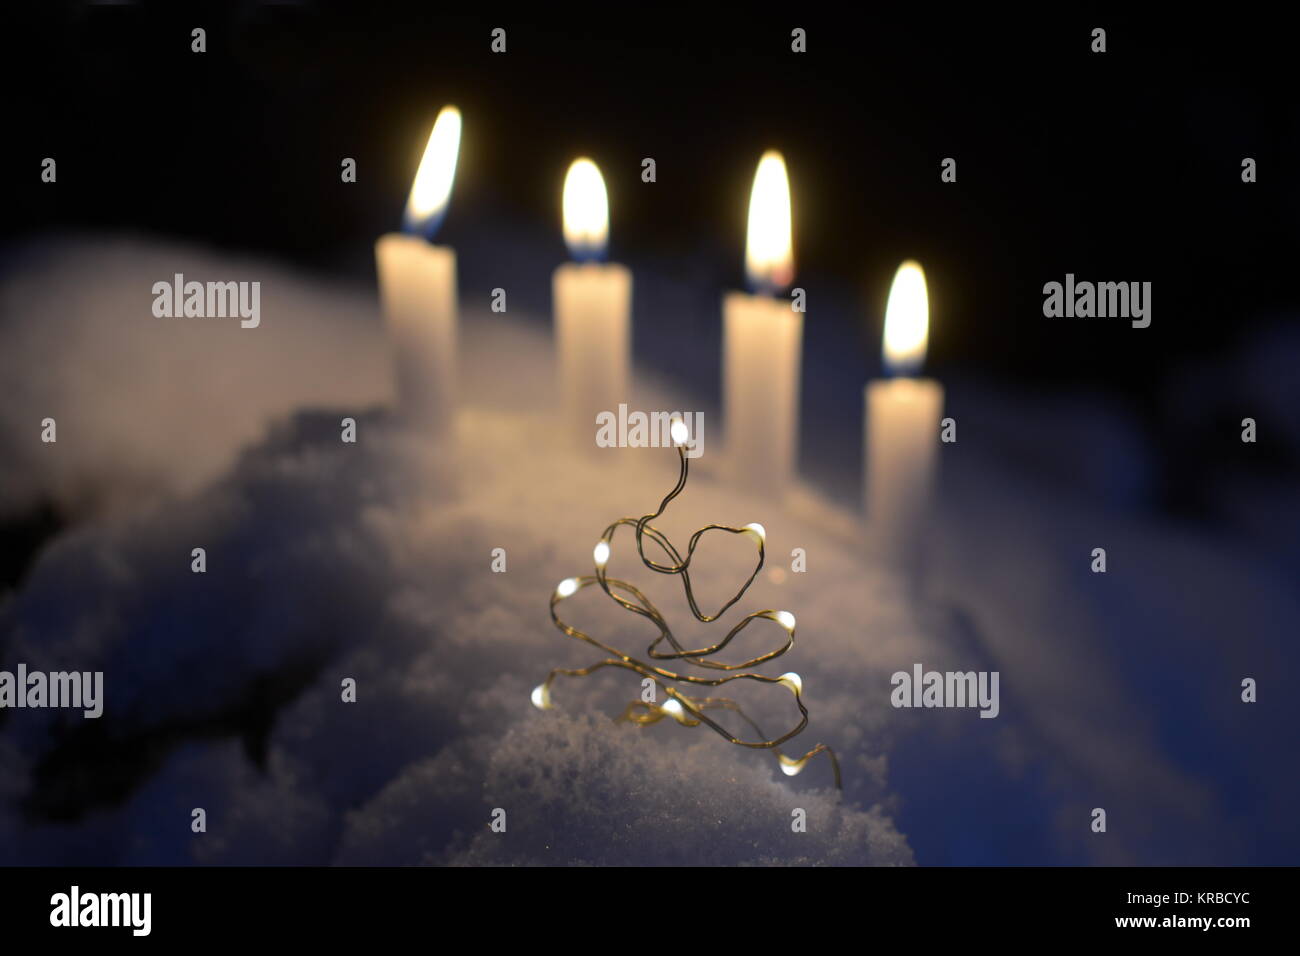 A little christmas tree with four white burning candles in the background, outdoors in the snow Stock Photo